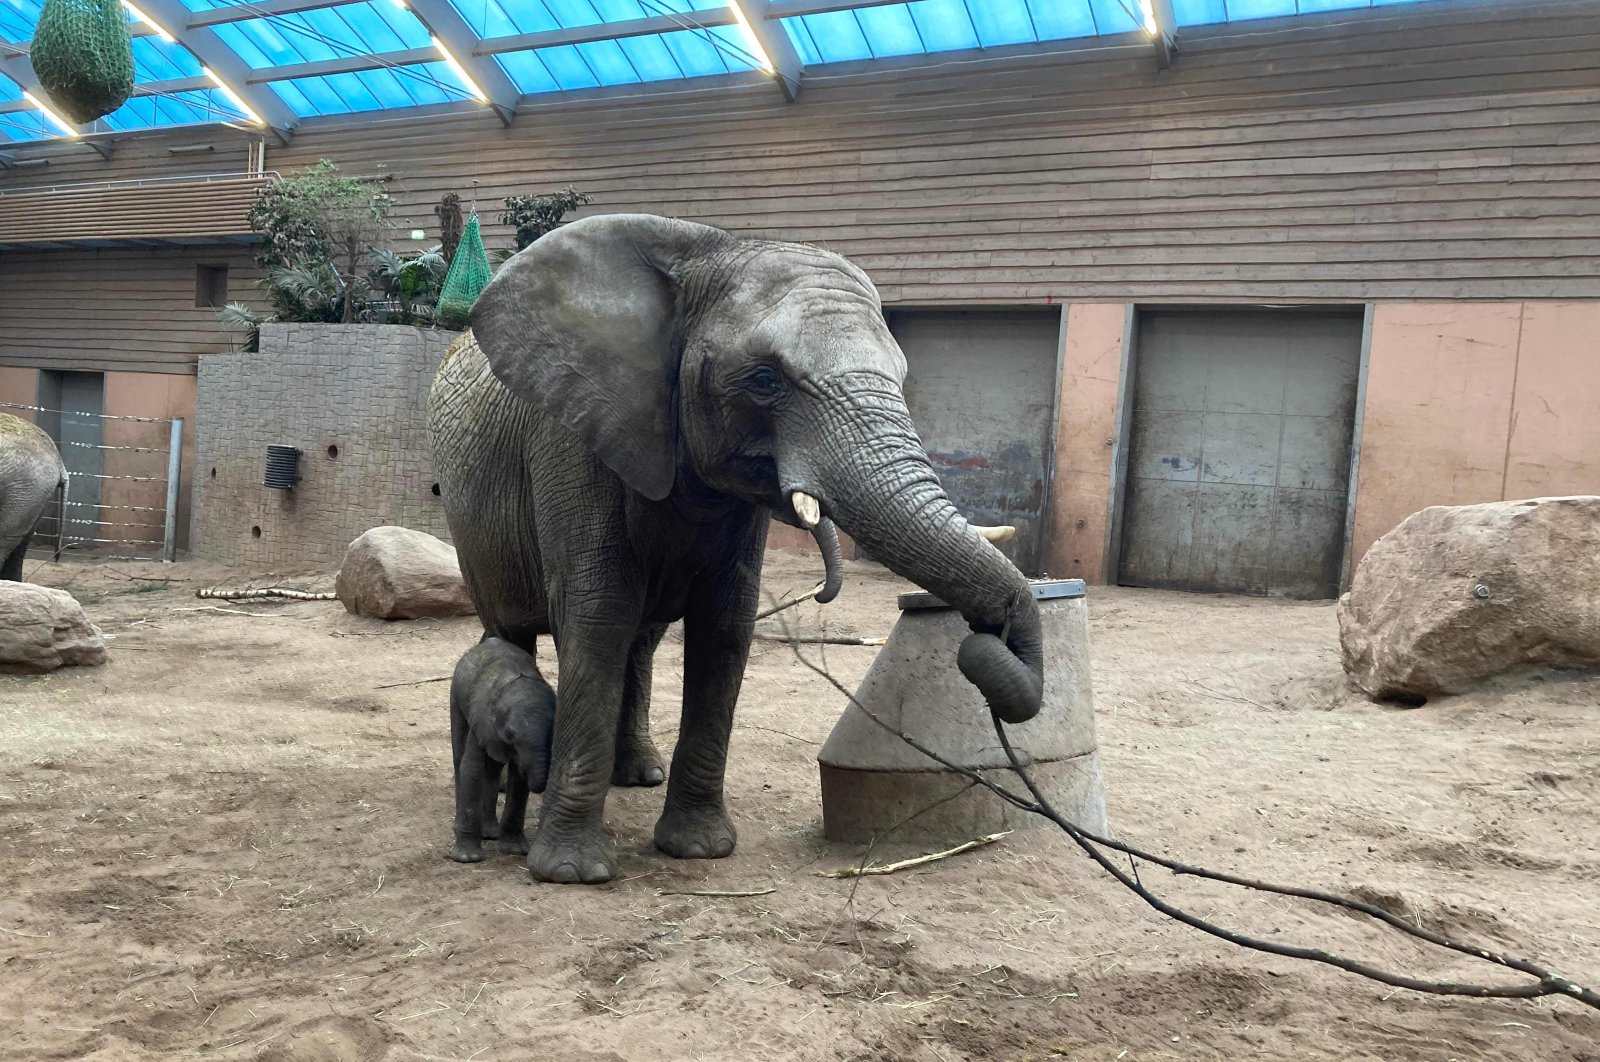 The 16-year-old African elephant Panzi walks with her elephant calf in the zoo enclosure in Boras, Sweden, March 30, 2021. (Boraas Djurpark via AFP)